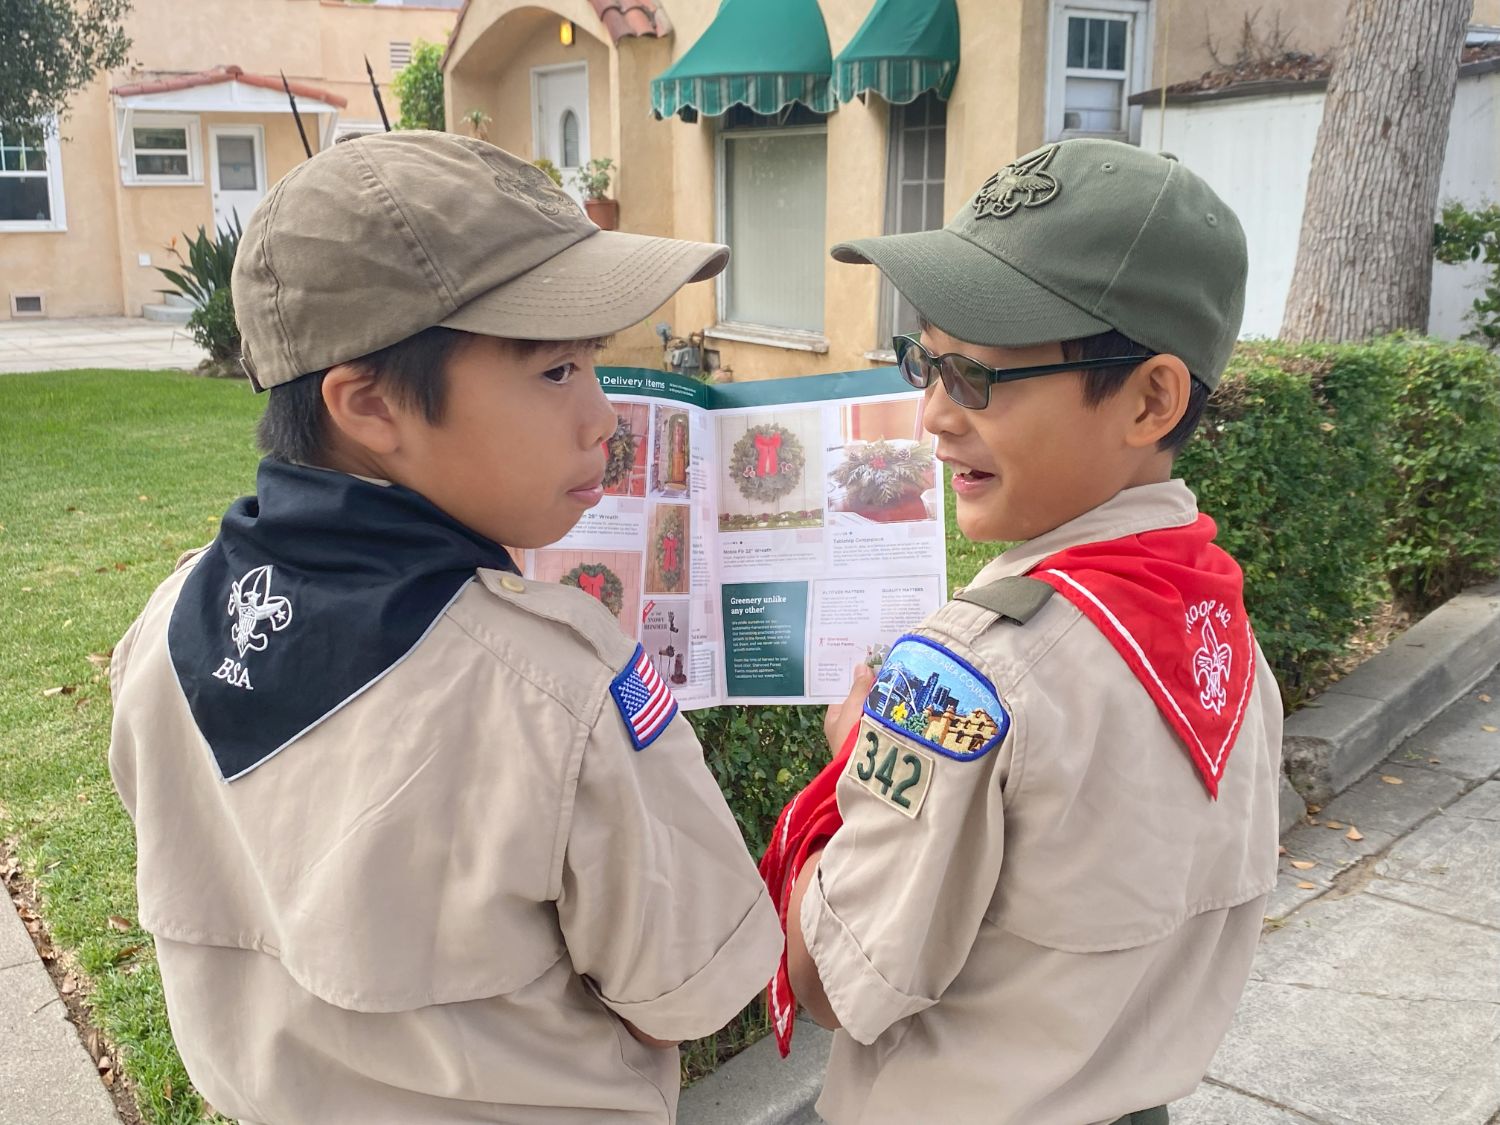 PHOTO: provided by Troop 342 | The South Pasadenan | Benji Beteta of Troop 7 in black neckerchief and Philip Kwak of Troop 342 in red neckerchief looking at a product flyer.